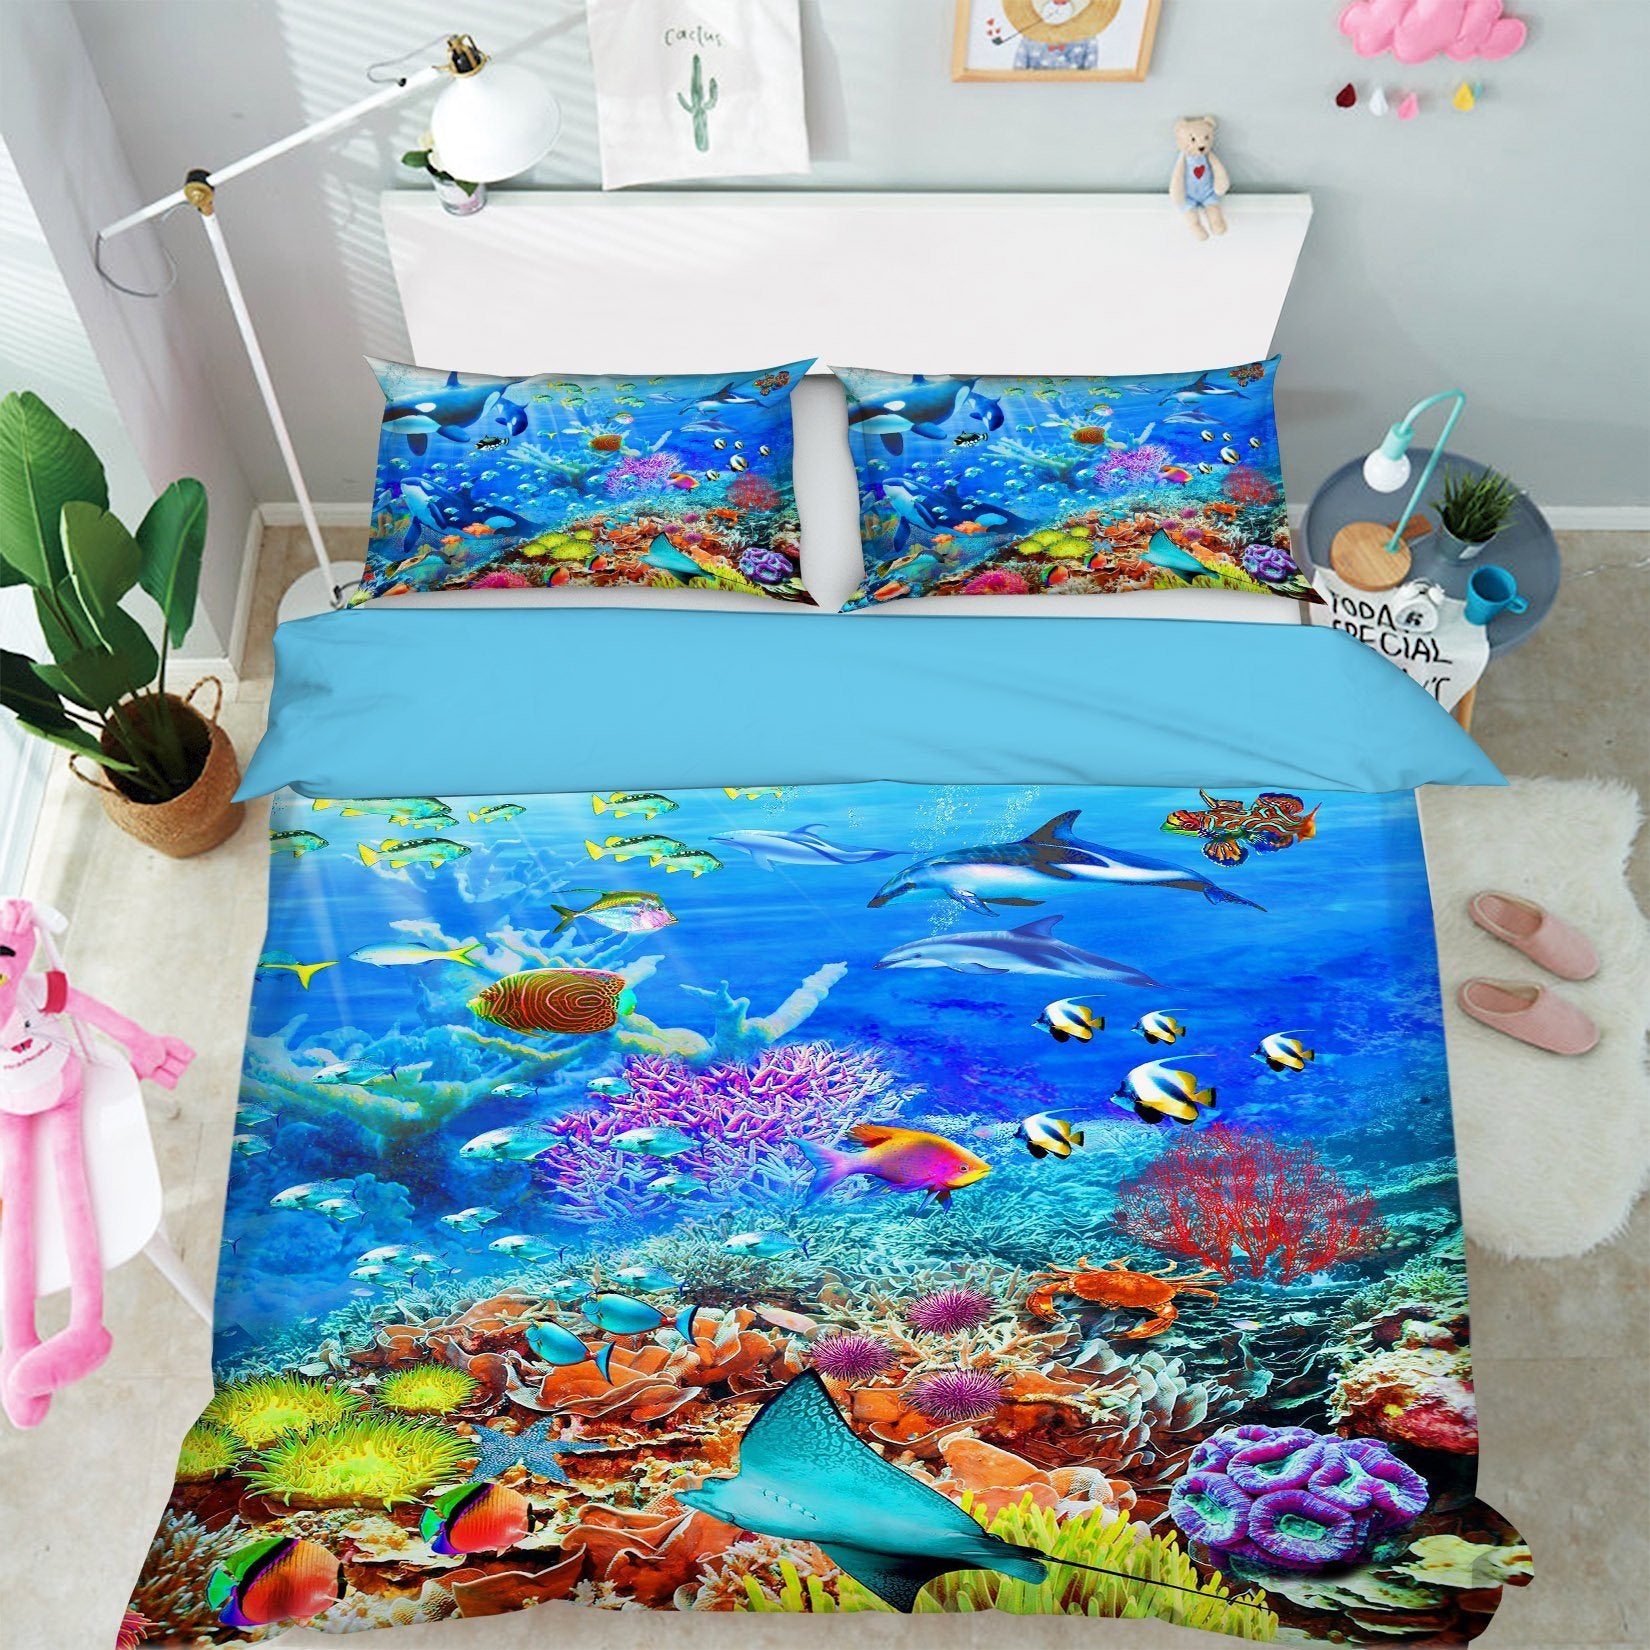 3D Beautiful Seabed 2114 Adrian Chesterman Bedding Bed Pillowcases Quilt Quiet Covers AJ Creativity Home 